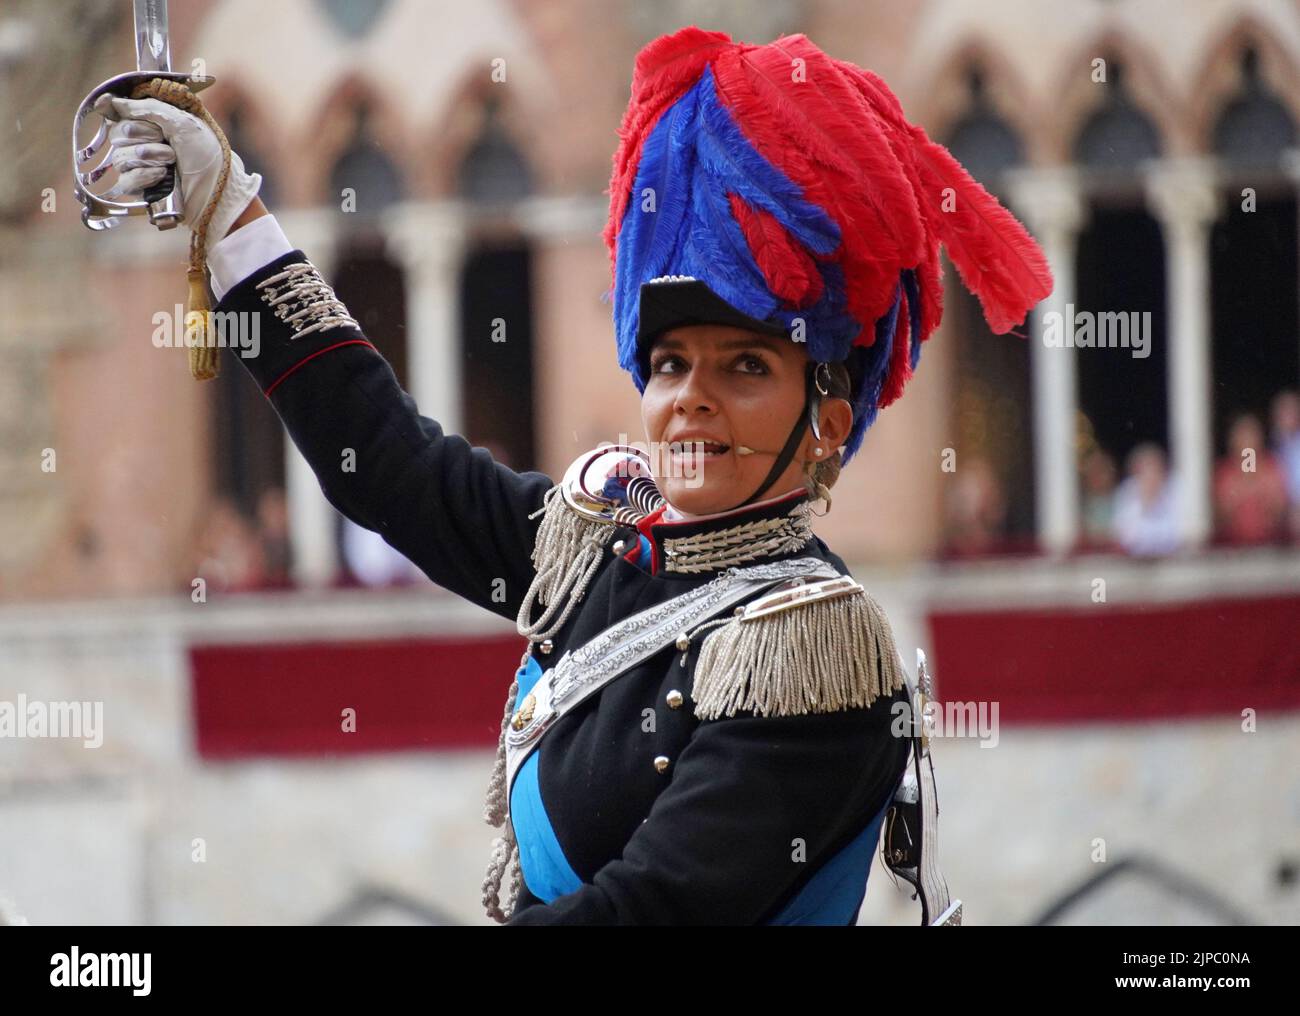 Siena, Italy. 16th Aug, 2022. An Italian Carabinieri performs before the suspension of the horse race Palio in Siena, Italy, Aug. 16, 2022. The horse race Palio has been postponed to Aug. 17 due to the rain. The historical horse race Palio is held again this year after a two-year pause because of the COVID-19 pandemic. Credit: Jin Mamengni/Xinhua/Alamy Live News Stock Photo